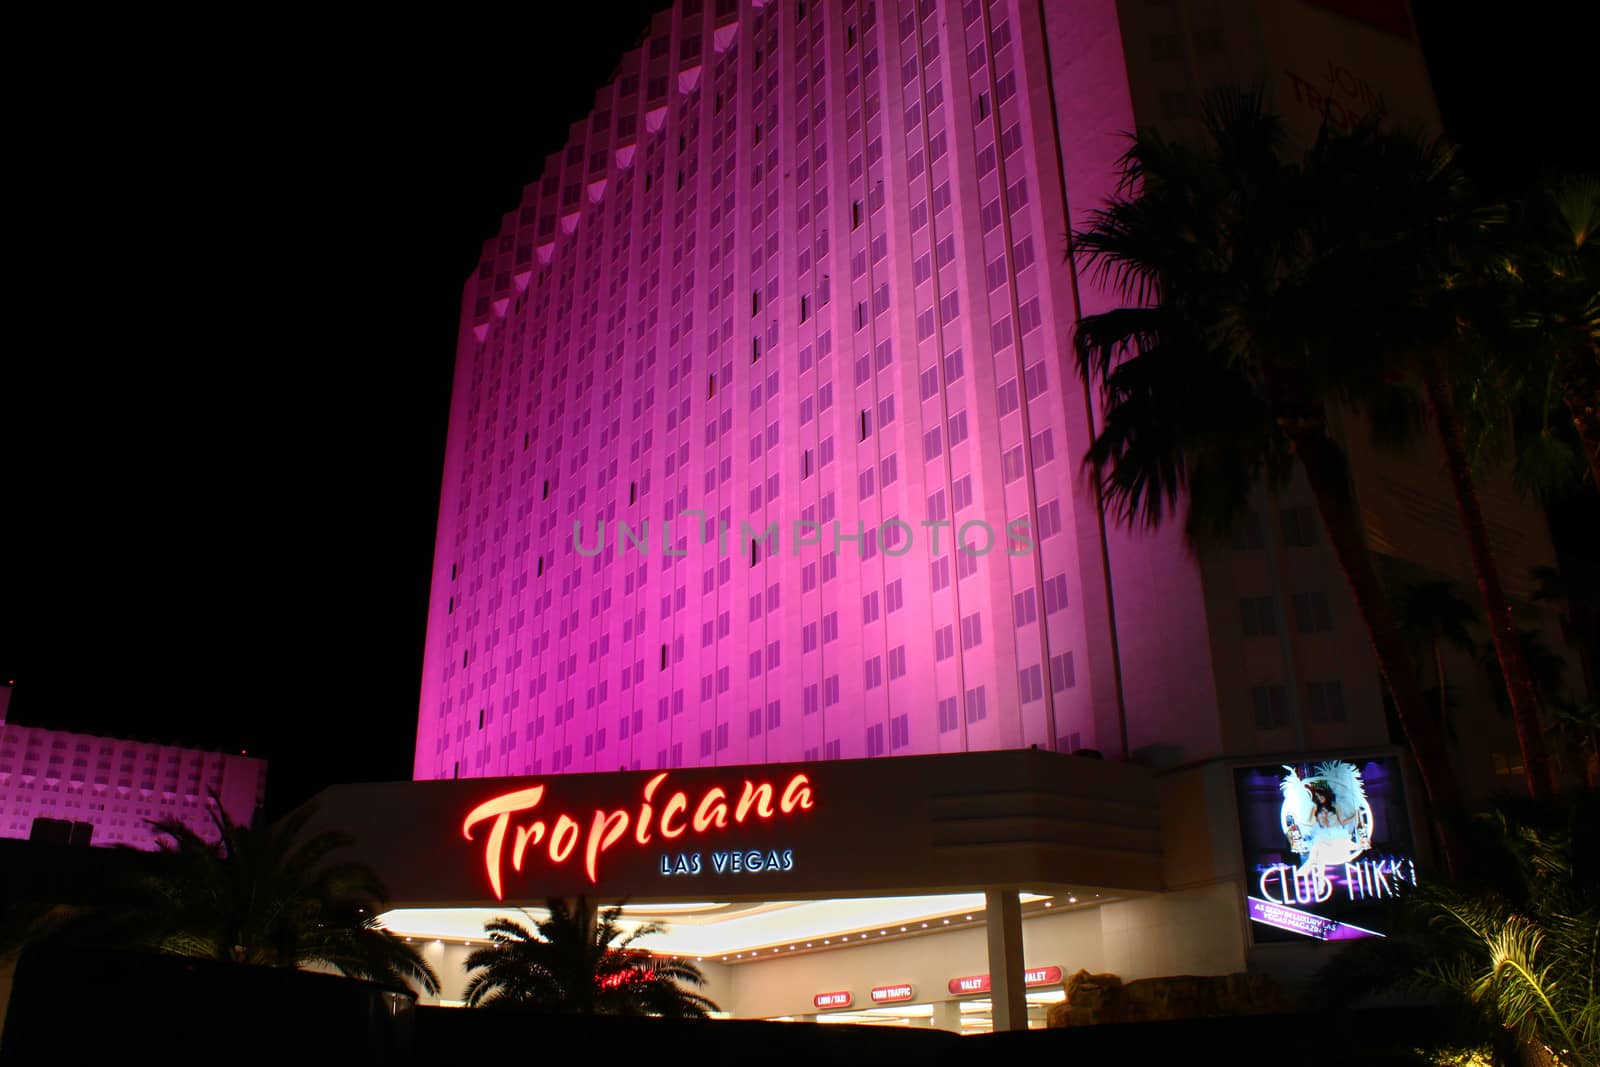 Tropicana Las Vegas Hotel and Resort by Wirepec